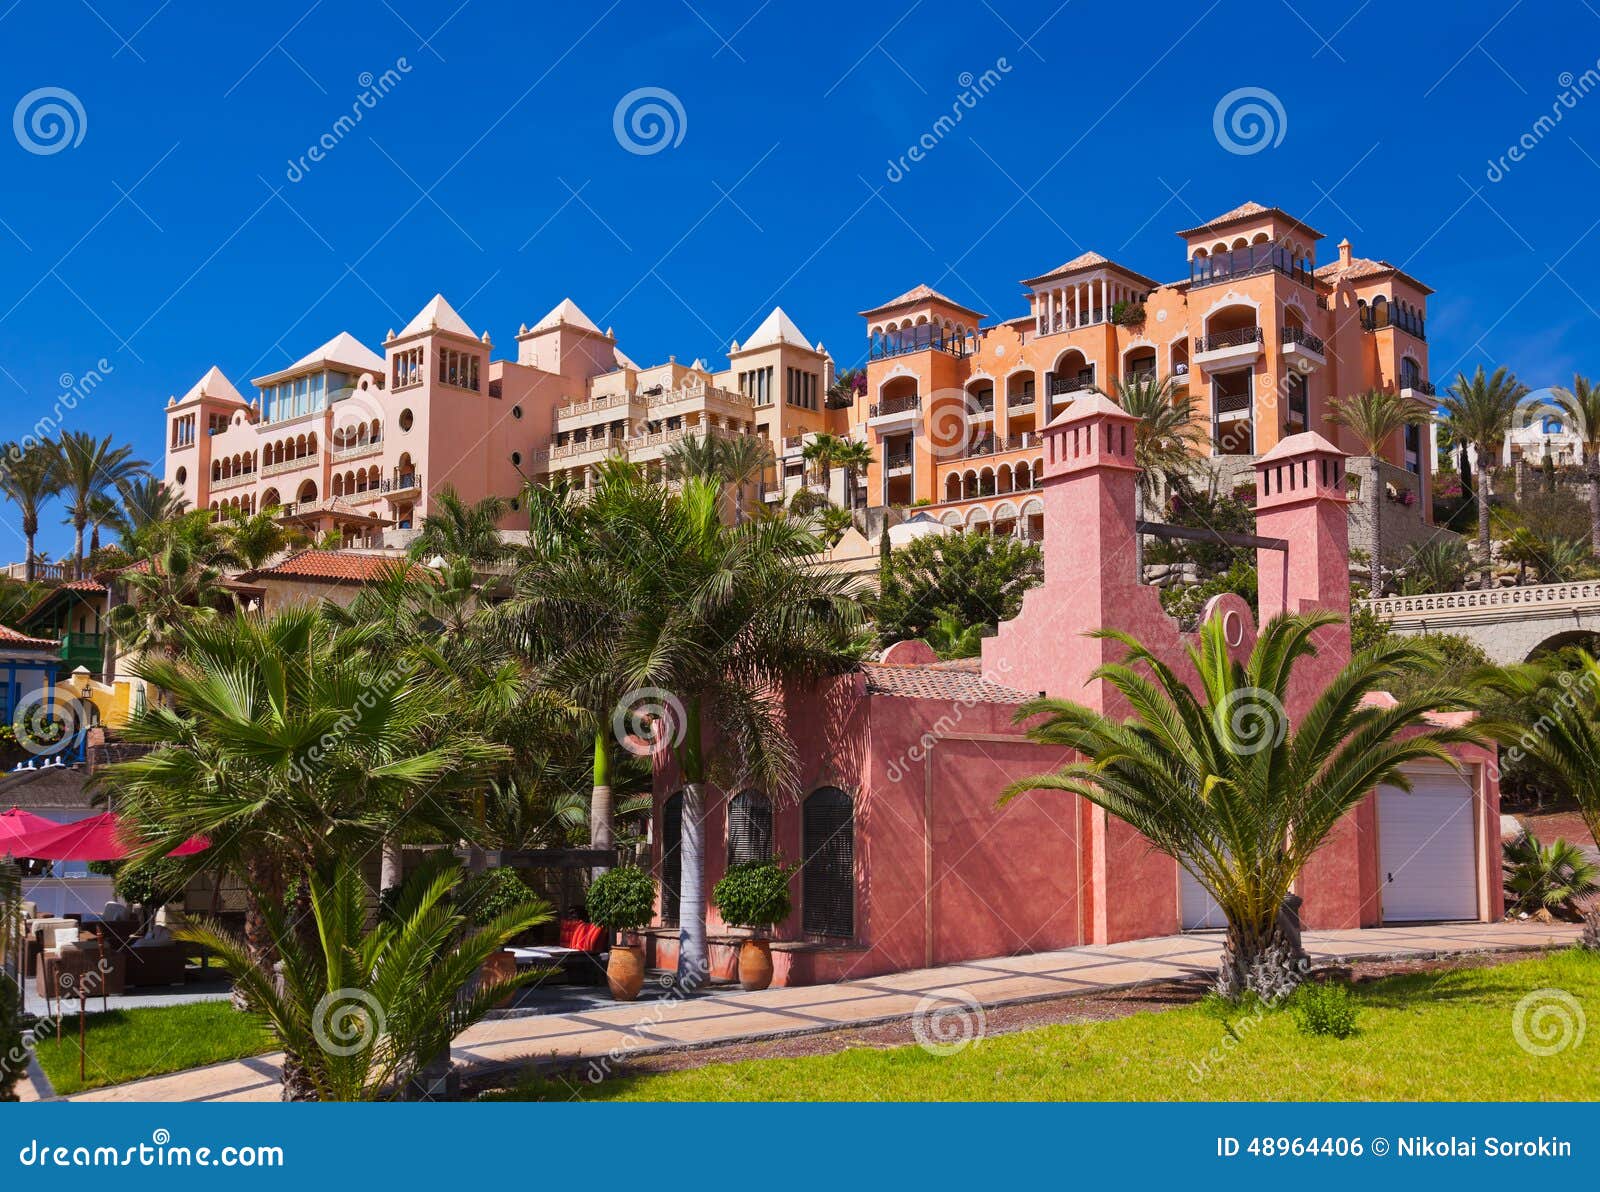 architecture at tenerife island - canaries